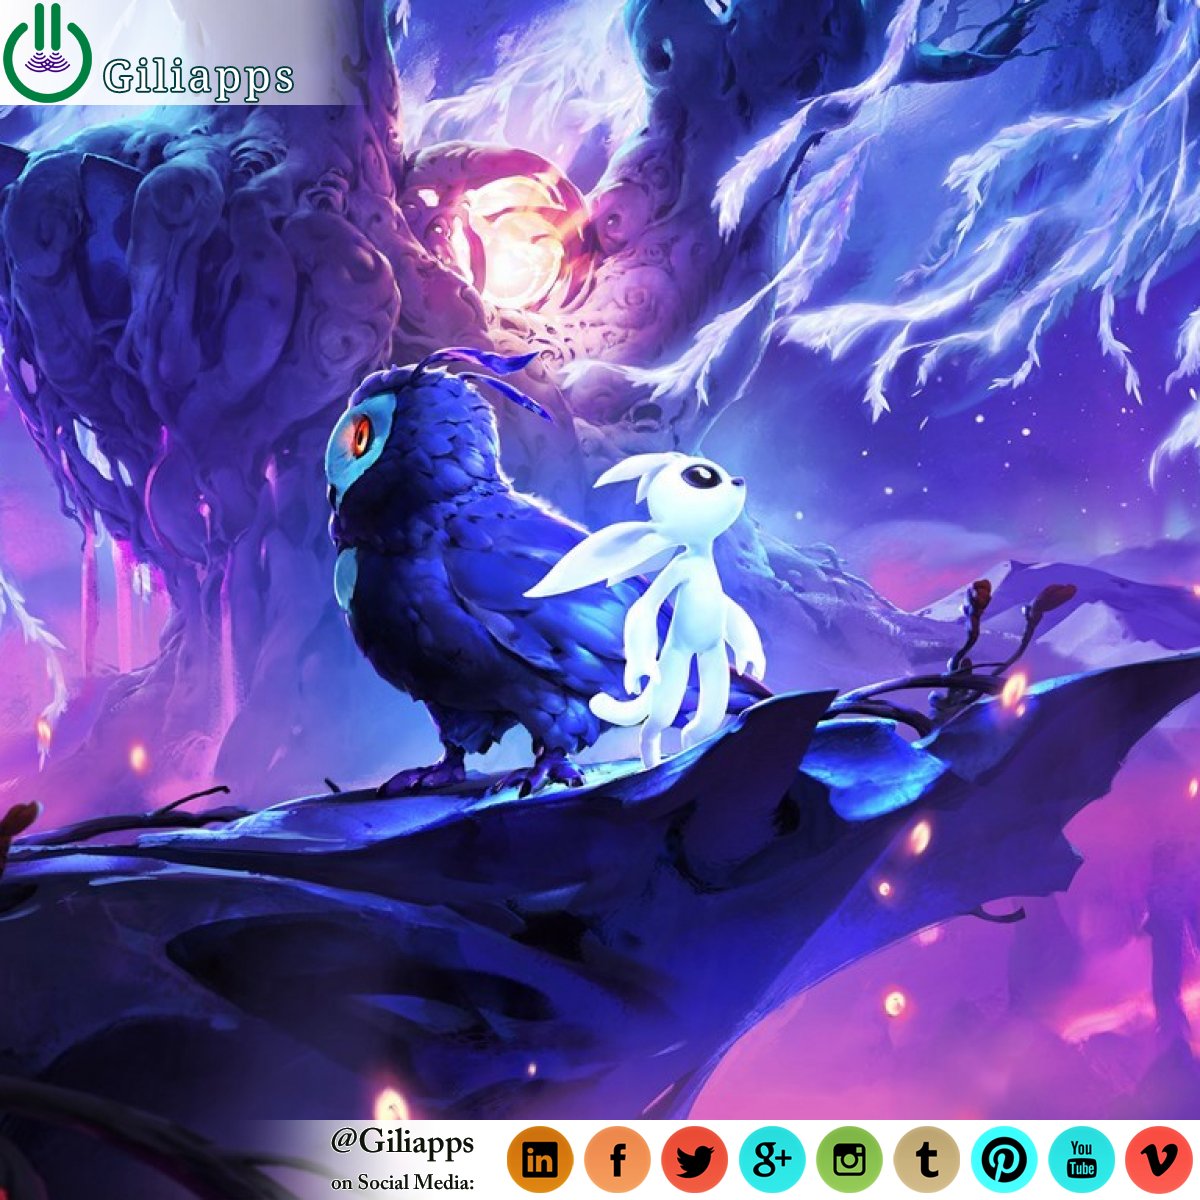 ori and the will of the wisps will release on 11 Mar 2020